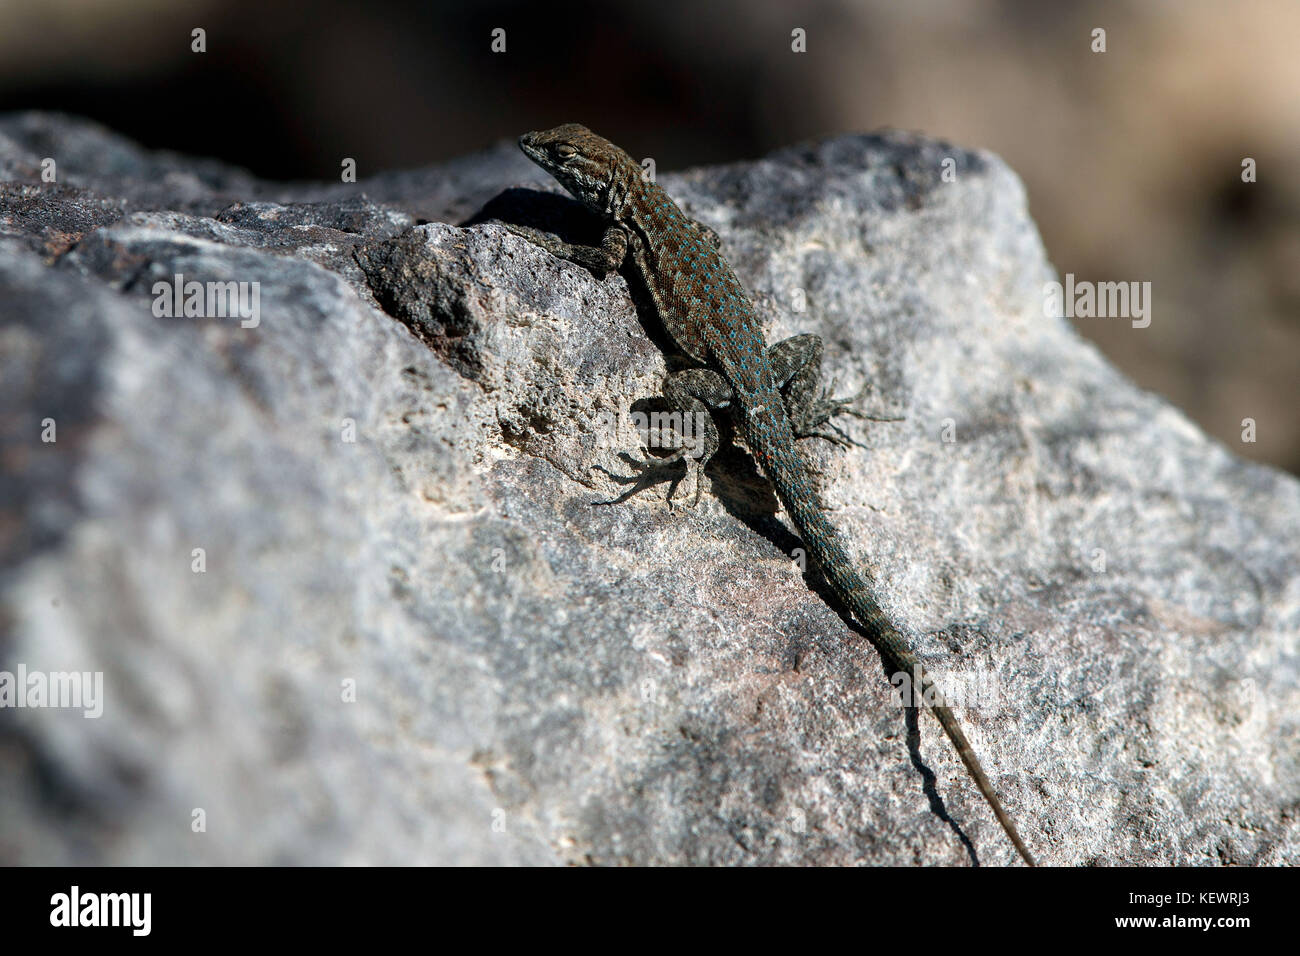 A lizard sits on the edge of  Star Wars Canyon / Rainbow Canyon, Death Valley National Park, Panamint Springs, California, United States of America Stock Photo